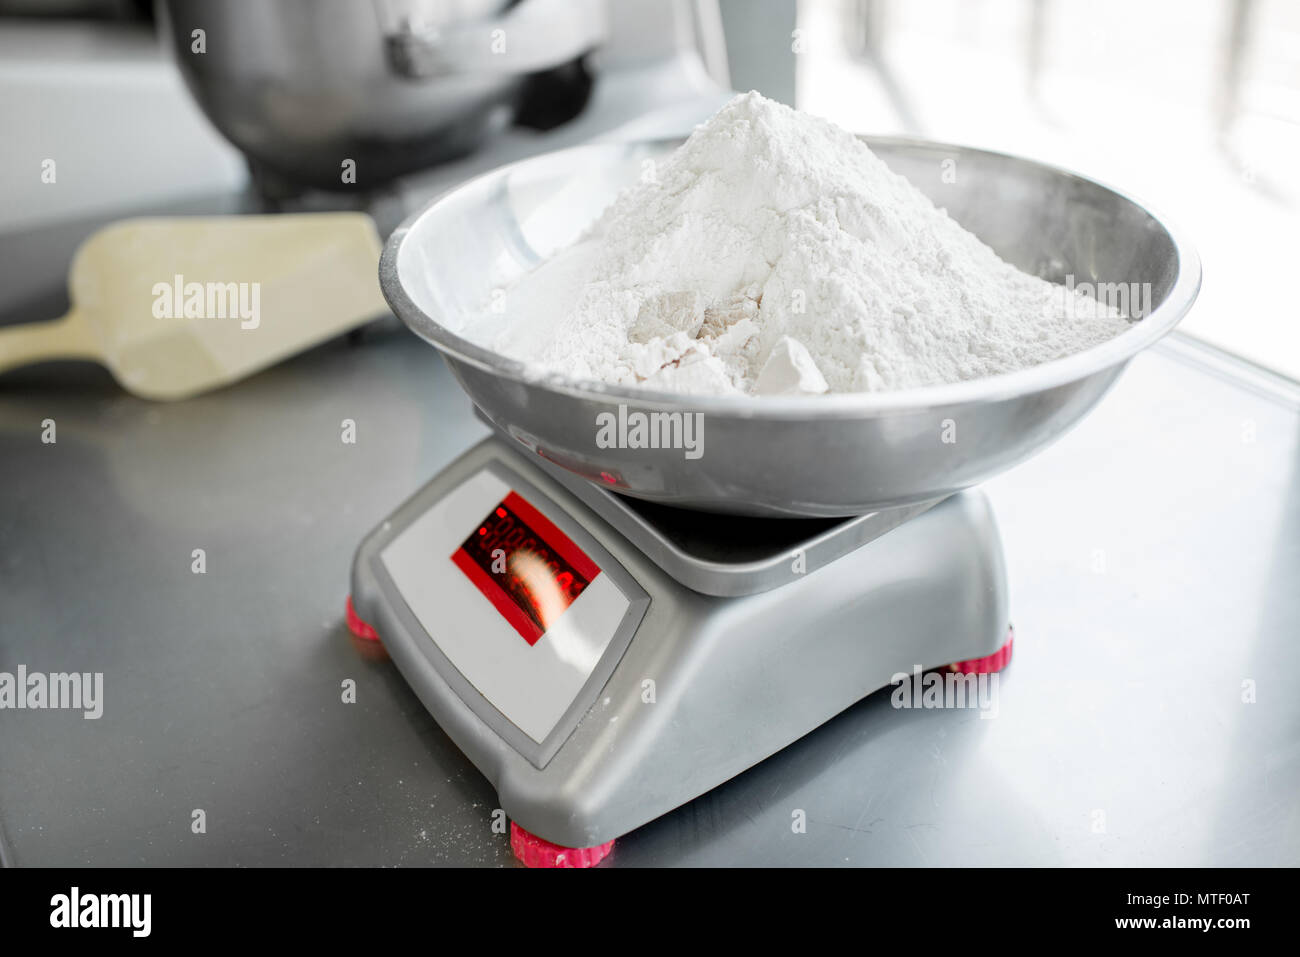 https://c8.alamy.com/comp/MTF0AT/weighing-flour-for-baking-with-professional-scales-at-the-manufacturing-close-up-view-MTF0AT.jpg